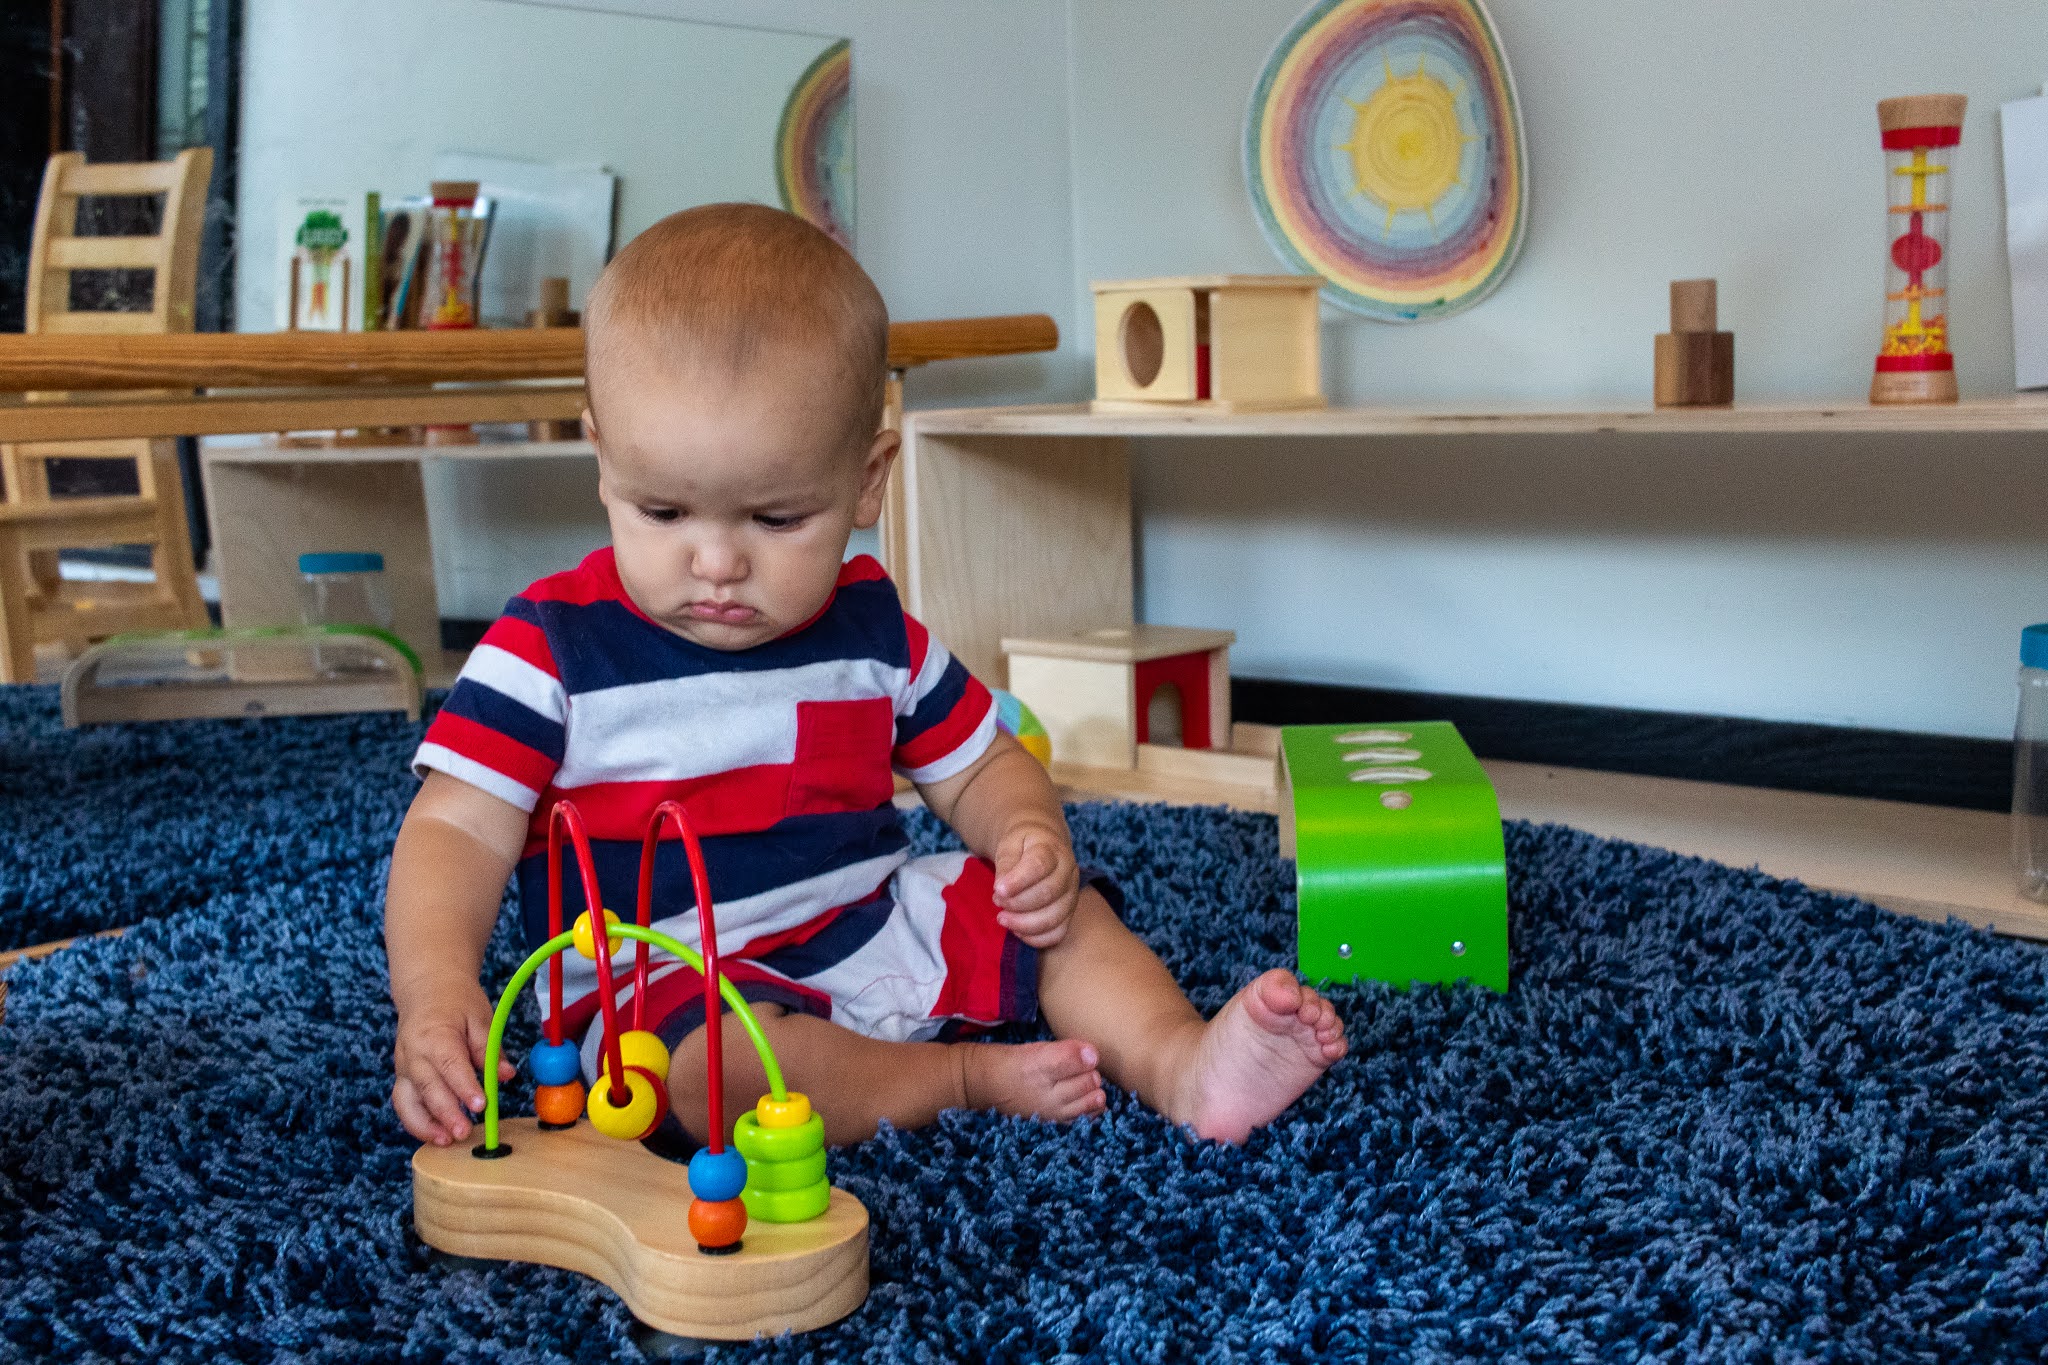 Bead movers are a wonderful Montessori baby activity. Here are some options and ideas to look for when considering a bead mover for your baby.